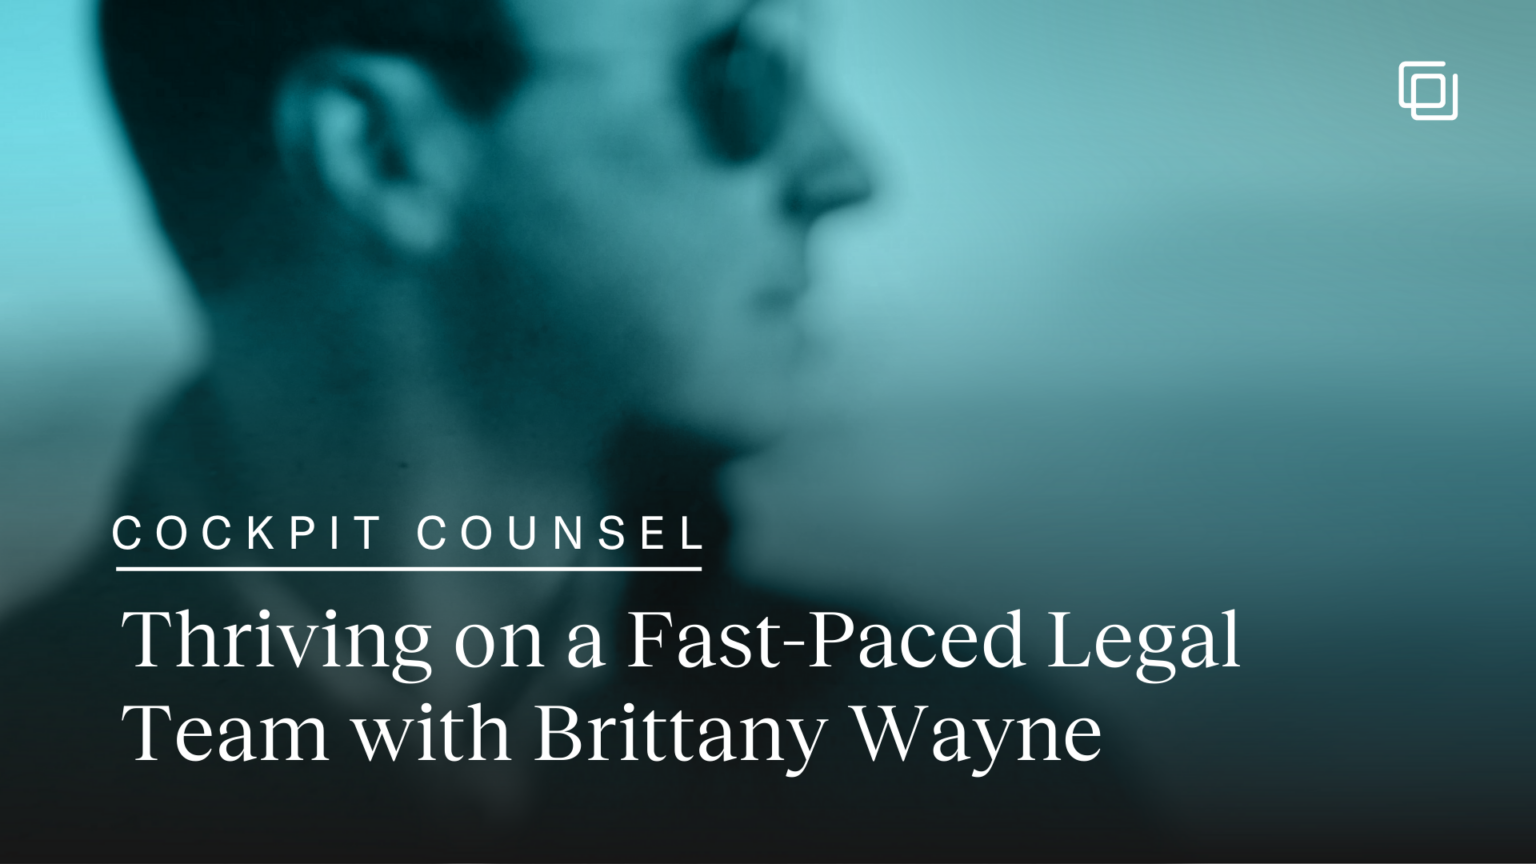 Cockpit Counsel: Thriving on a Fast-Paced Legal Team with Brittany Wayne